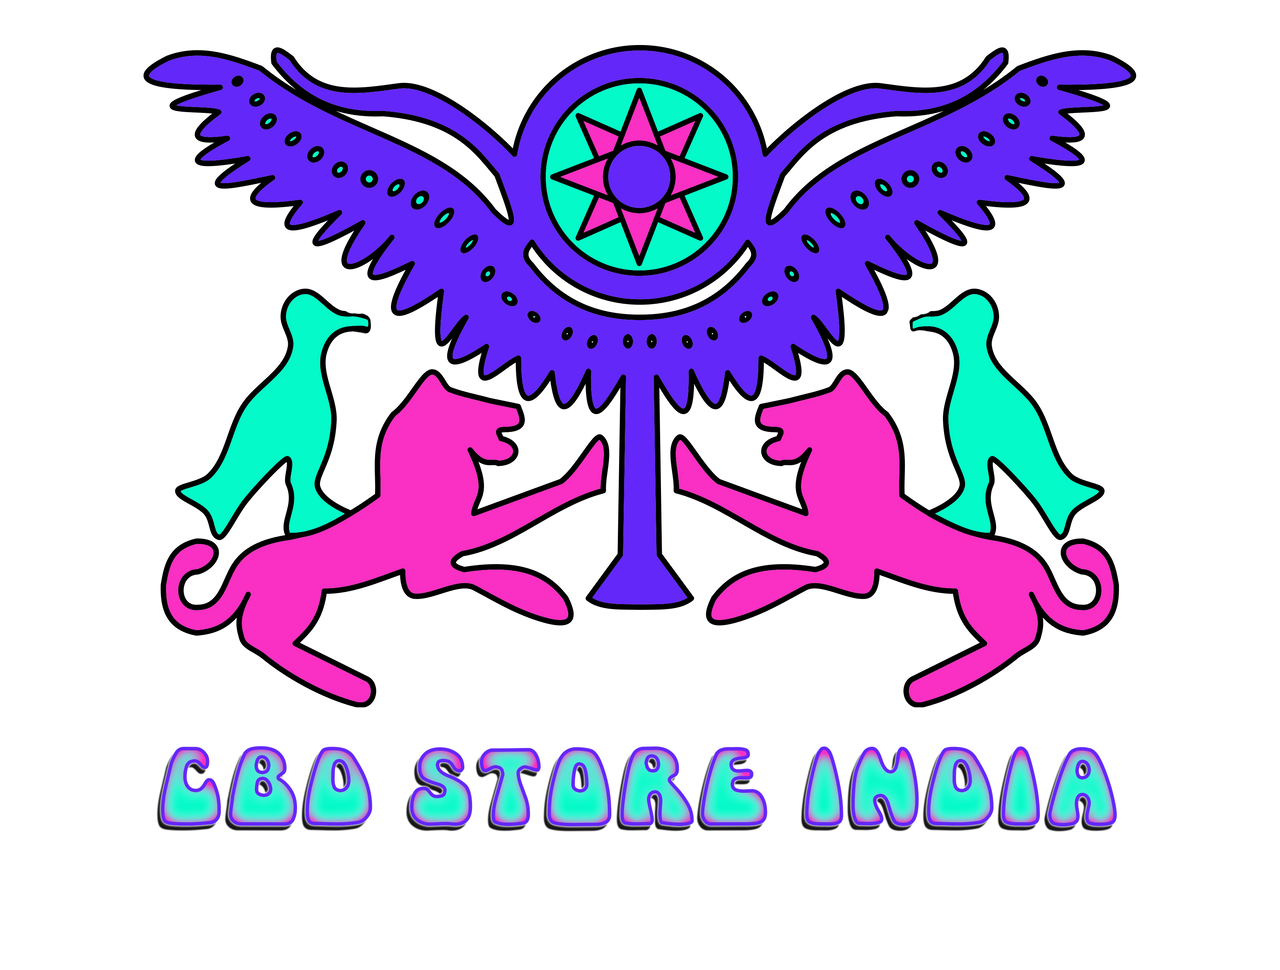 CBD Store India - Buy Best CBD Oils, Cannabis extracts, Hemp Products, Yoga Products, Gemstone Jewellery and More